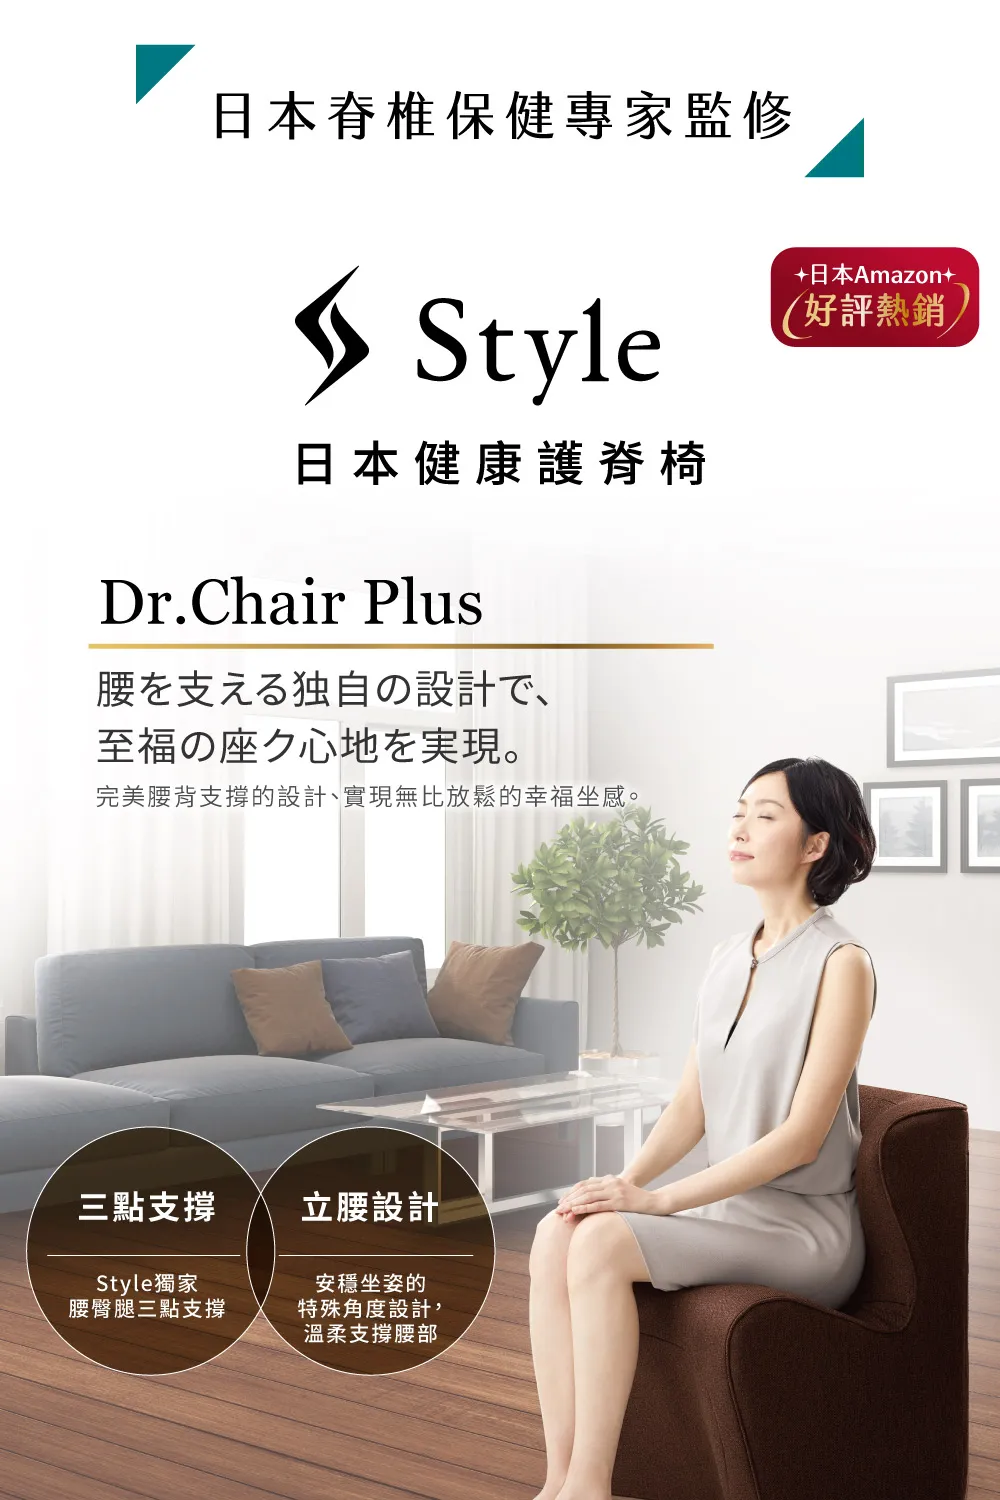 Style_EC23_DrChairPlus_01